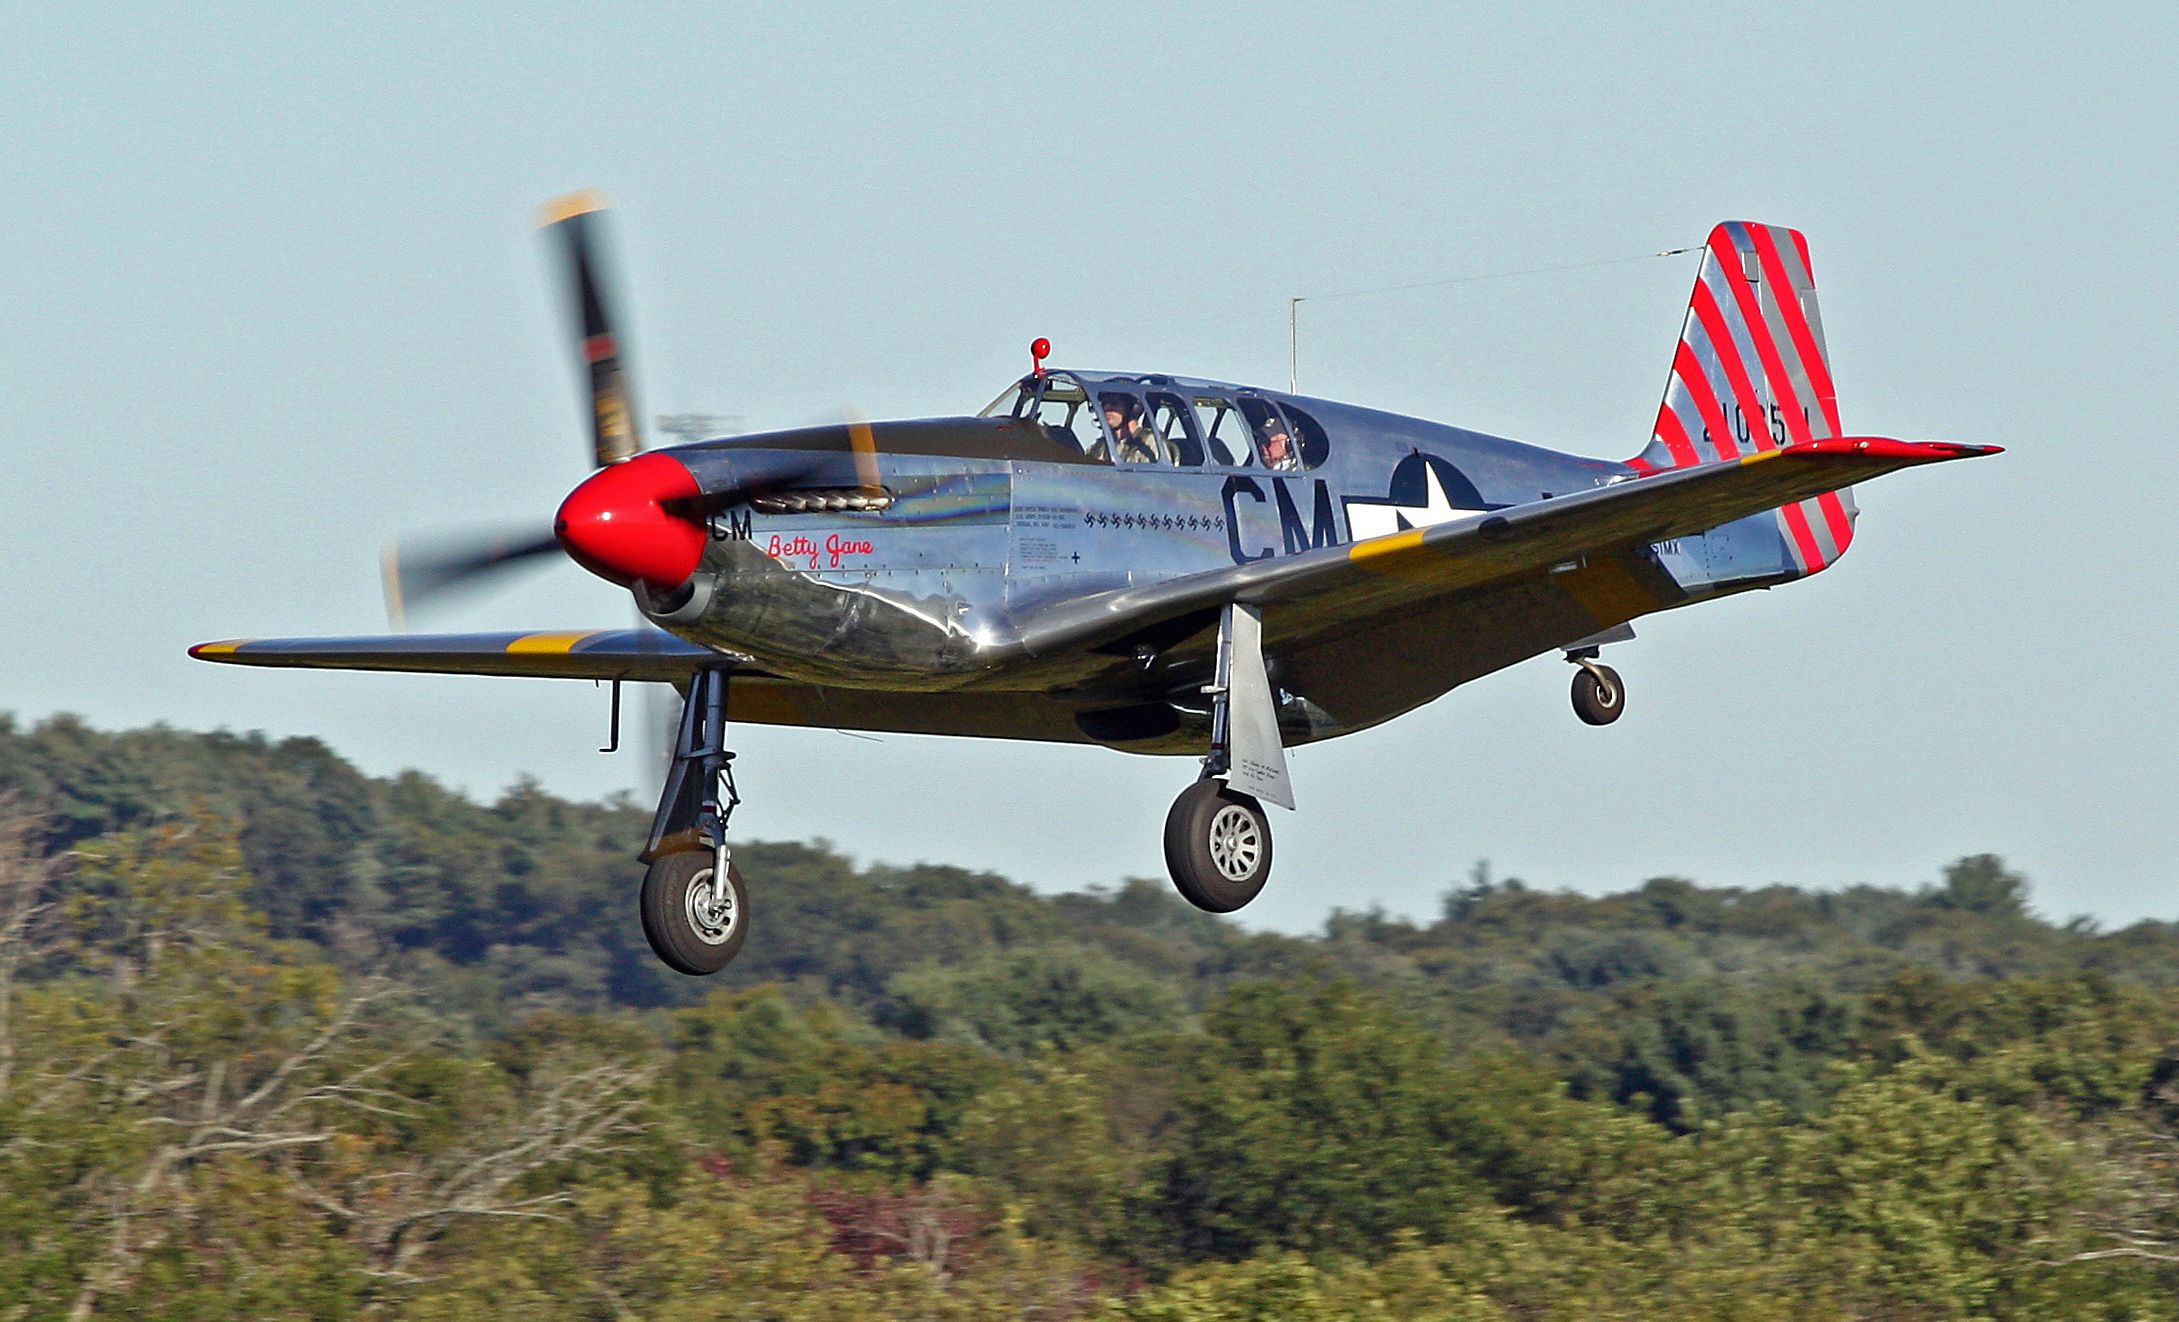 A P-51C Mustang flying in the sky.